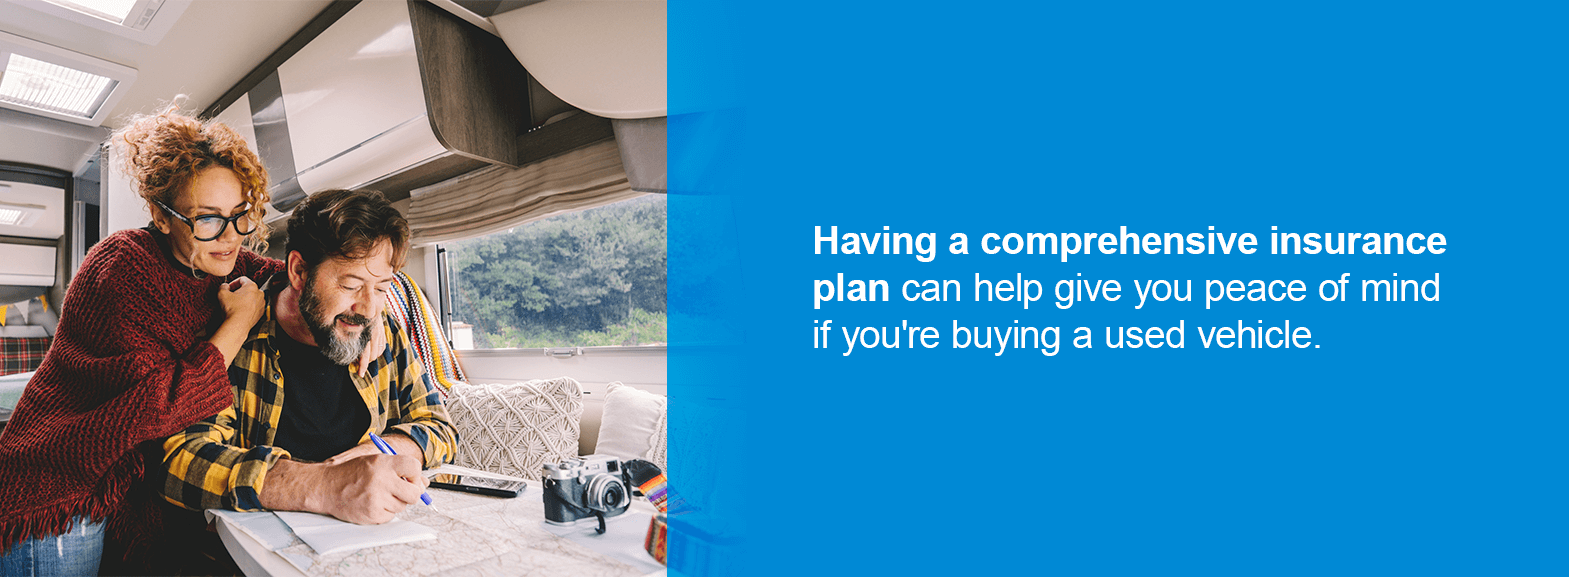 Having a comprehensive insurance plan can help give you peace of mind if you're buying a used vehicle